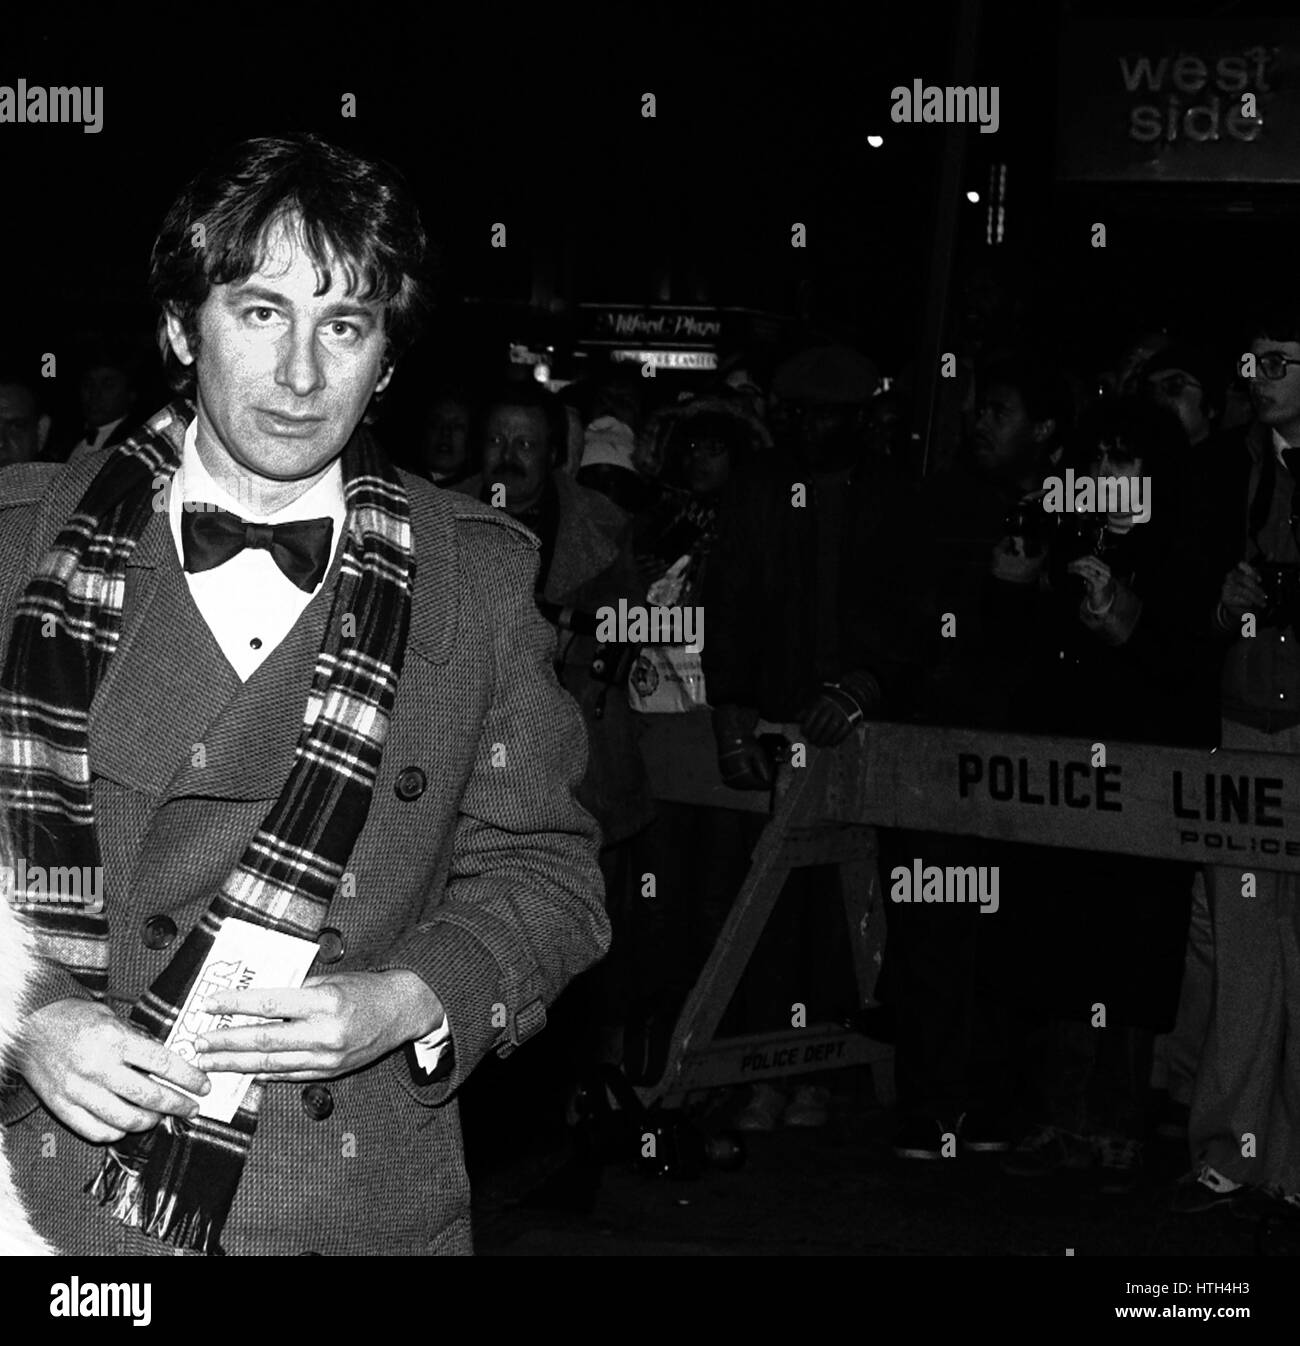 Steven Spielberg attending the Opening Night Performance of thye new Broadway Hit Musical DREAMGIRLS at the Imperial Theatre in New York City December 20, 1981 Stock Photo